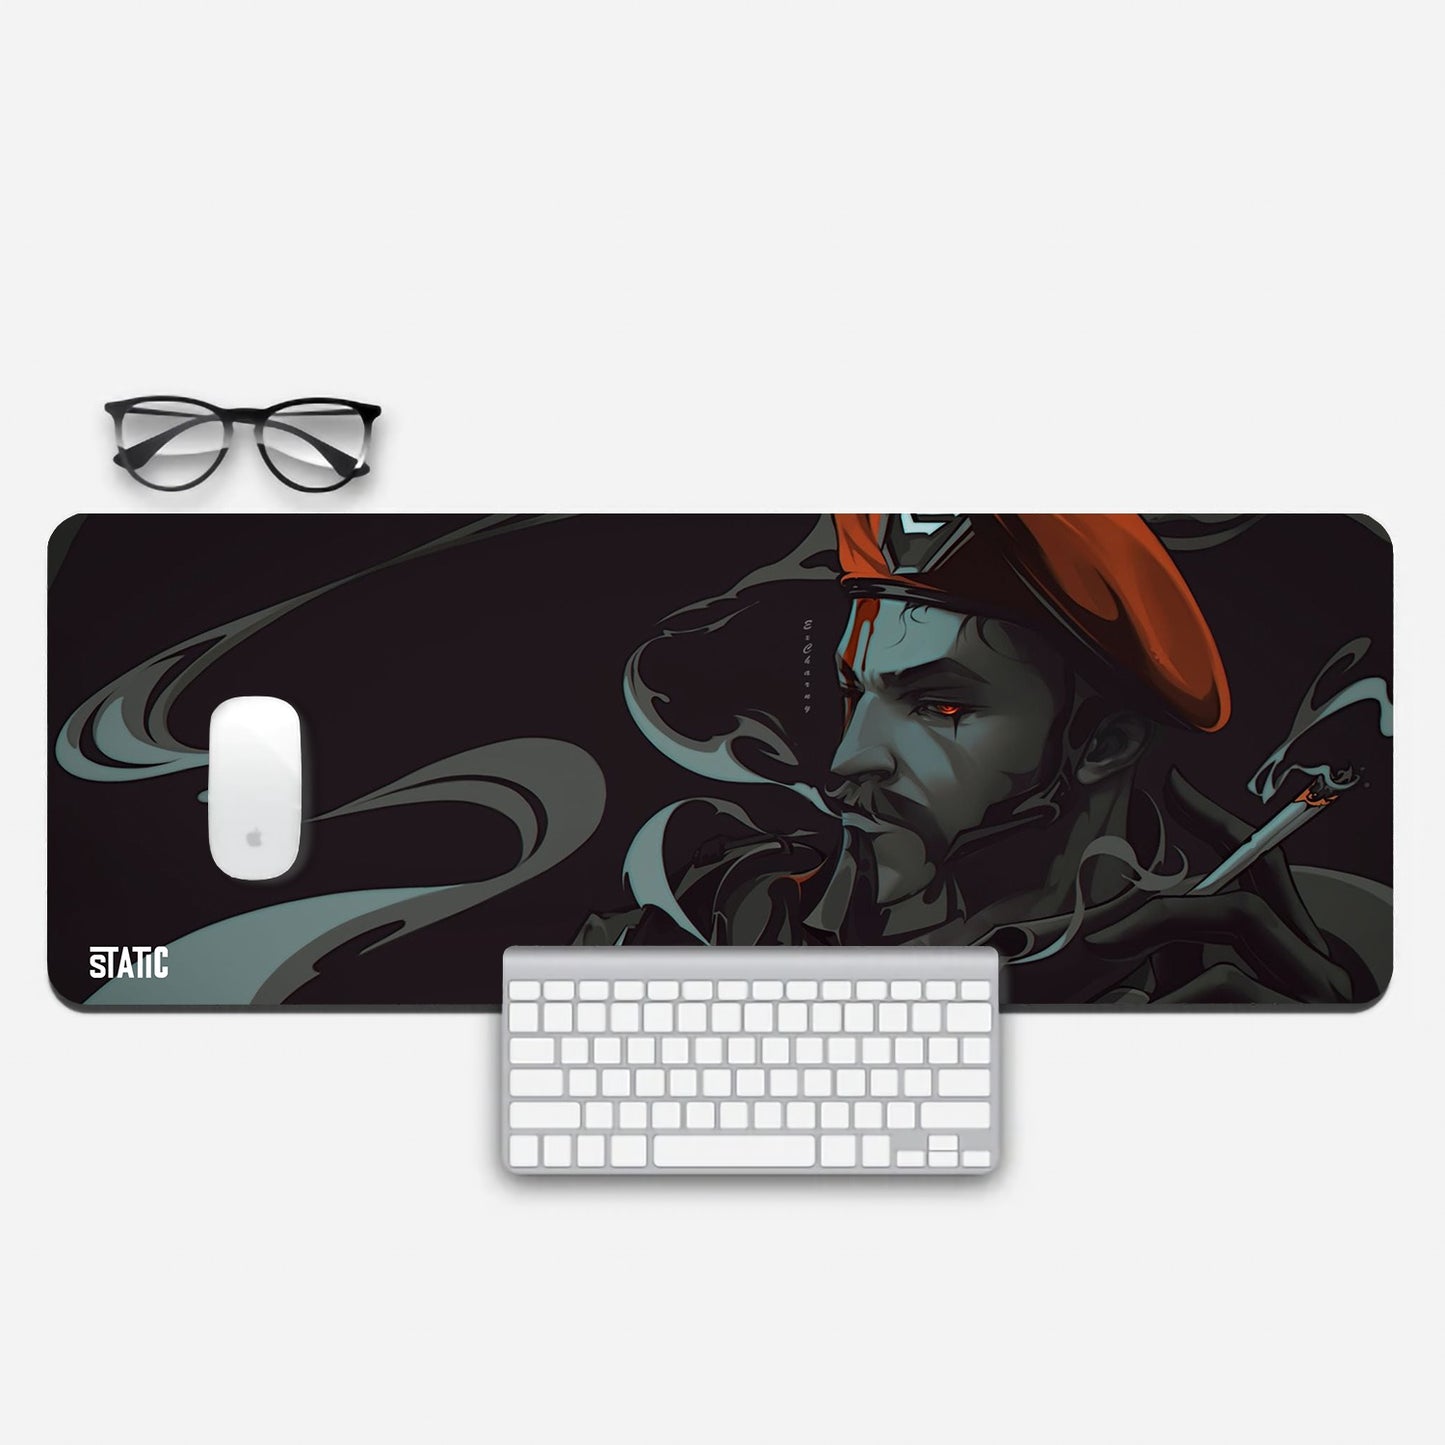 Elevate your gaming experience with our Extended Gaming Mouse Pad featuring Brimstone from Valorant. Dive into the action as Brimstone stands surrounded by swirling grey vapors, his iconic hat glowing warm red, and his eyes emitting the same fiery hue. Sized at 800x300mm, this mouse pad offers precision and style. Upgrade your setup with this premium gaming accessory. Get yours today!